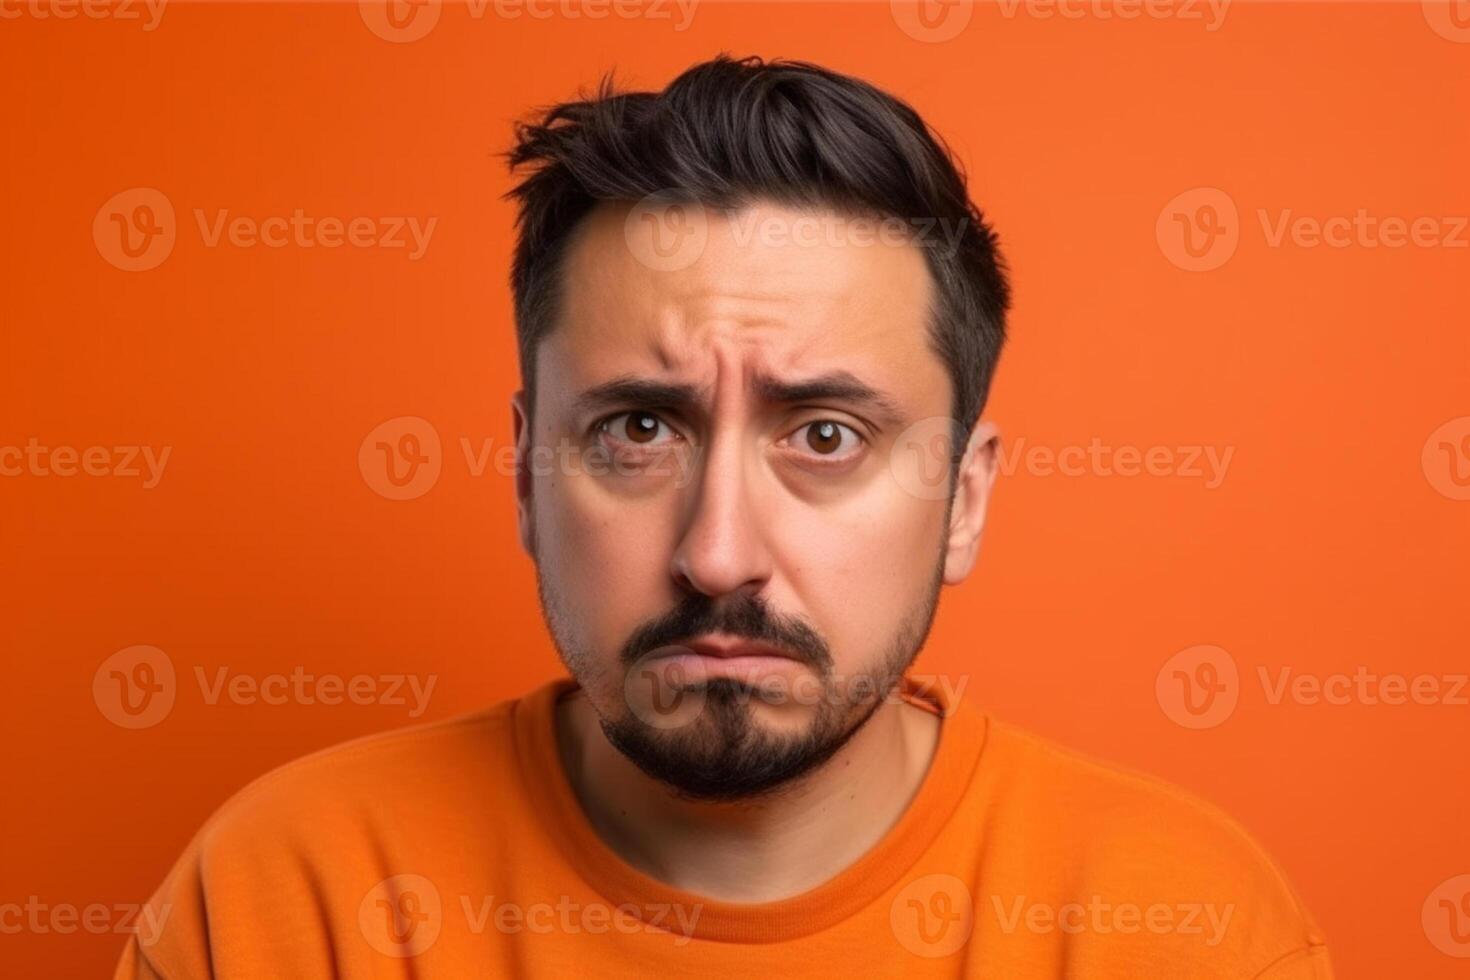 A man is being photographed on a solid background with a look of confusion on his face. photo